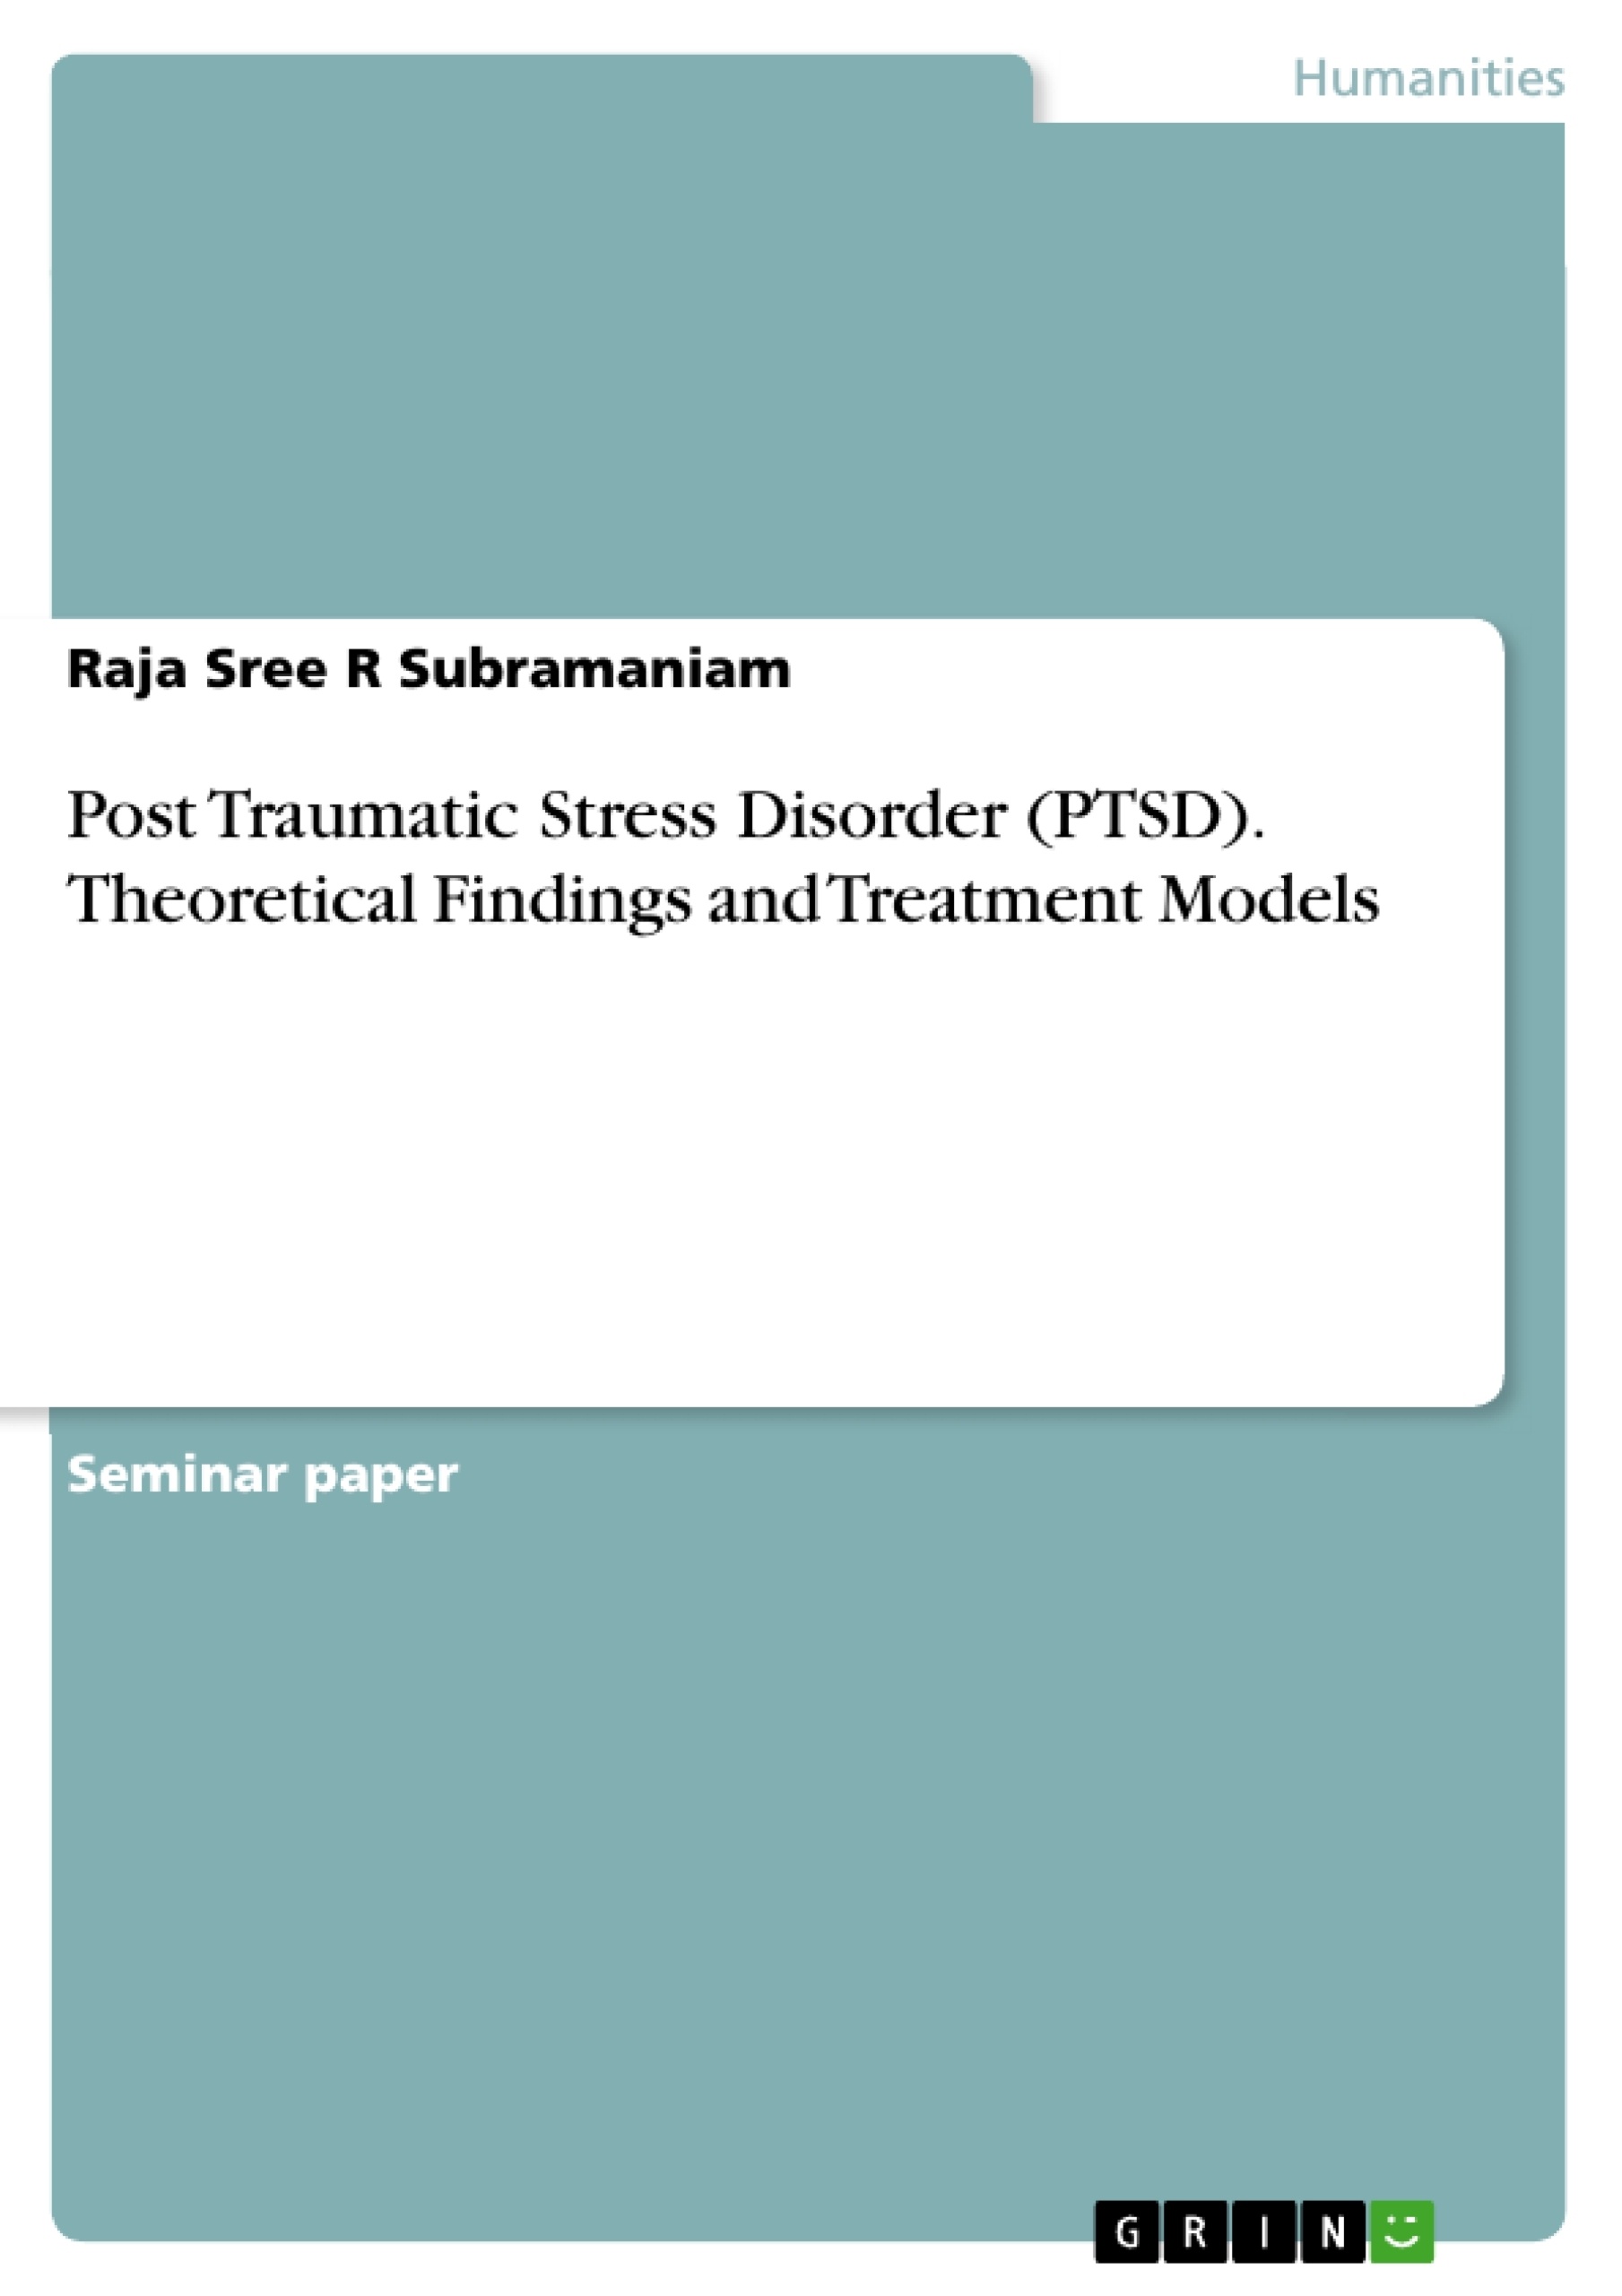 Título: Post Traumatic Stress Disorder (PTSD). Theoretical Findings and Treatment Models